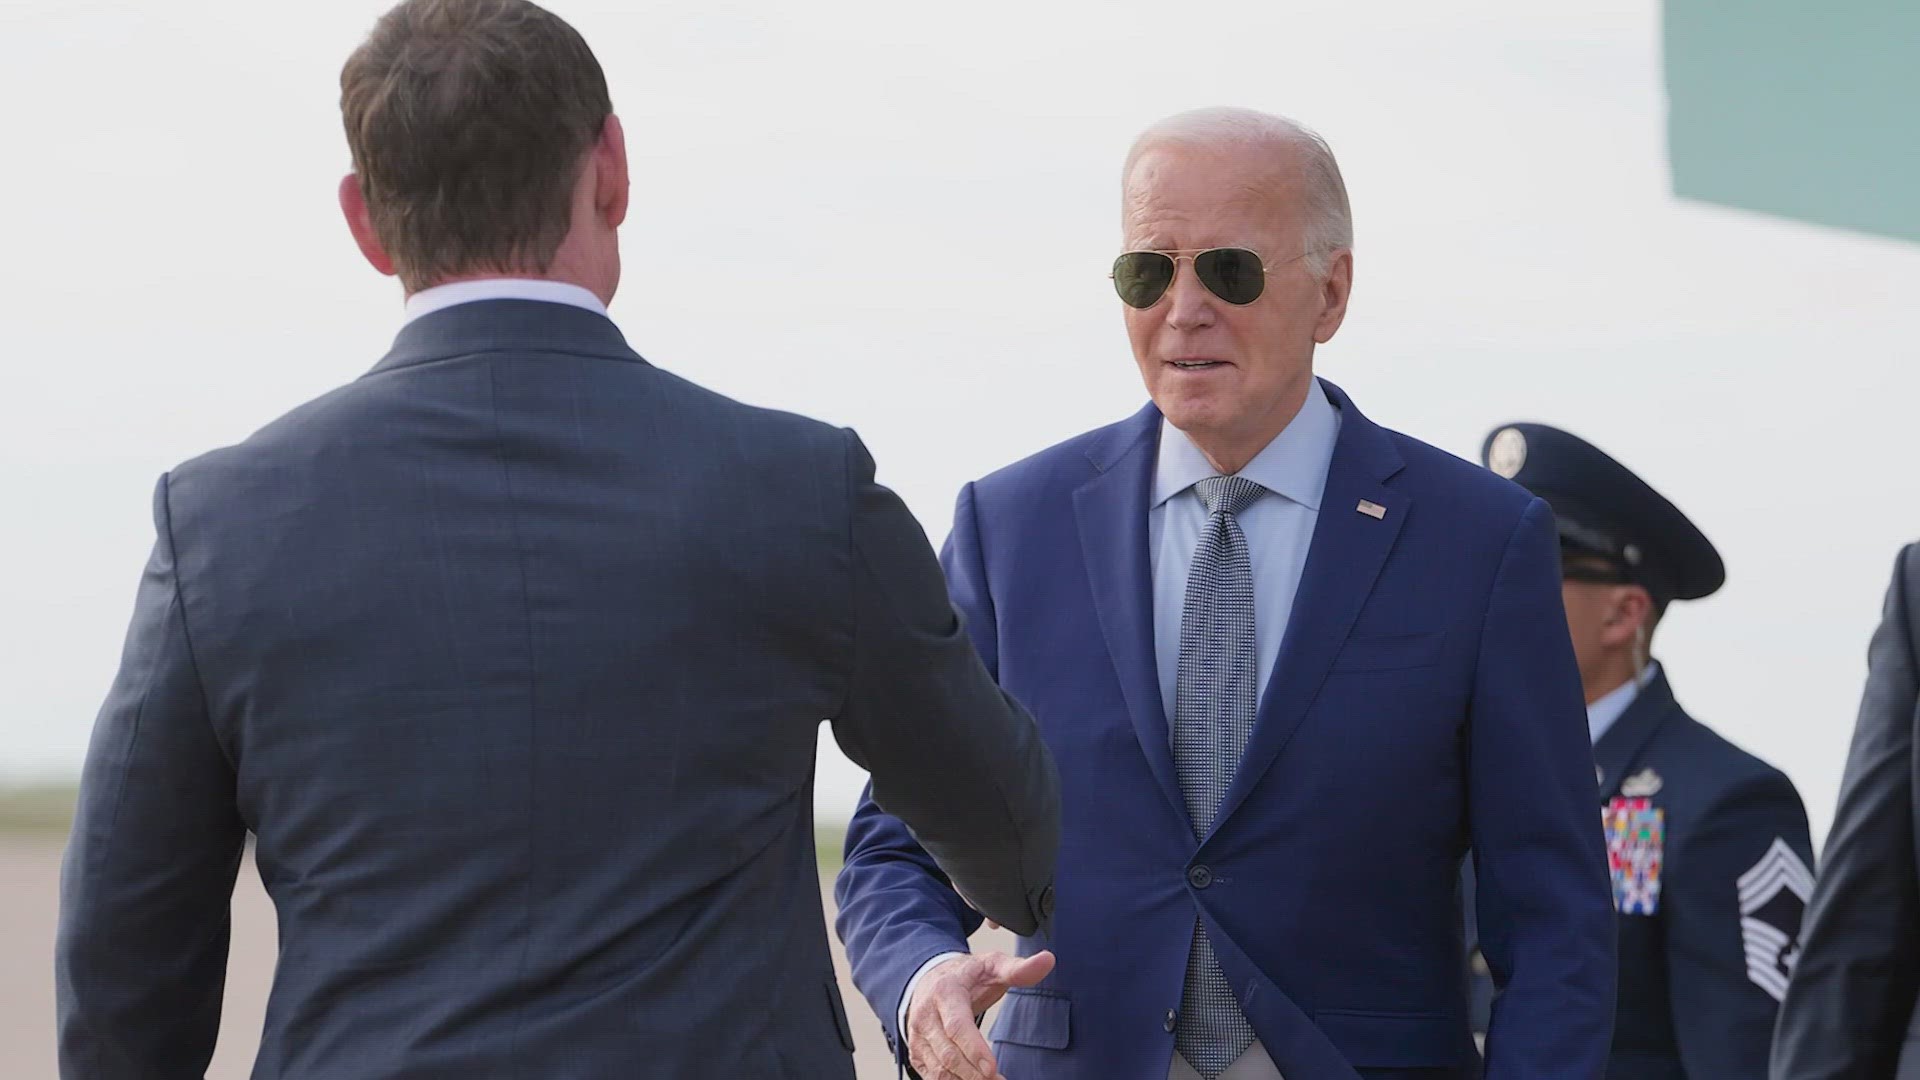 Biden was in Dallas on Wednesday followed by a visit to Houston on Thursday.